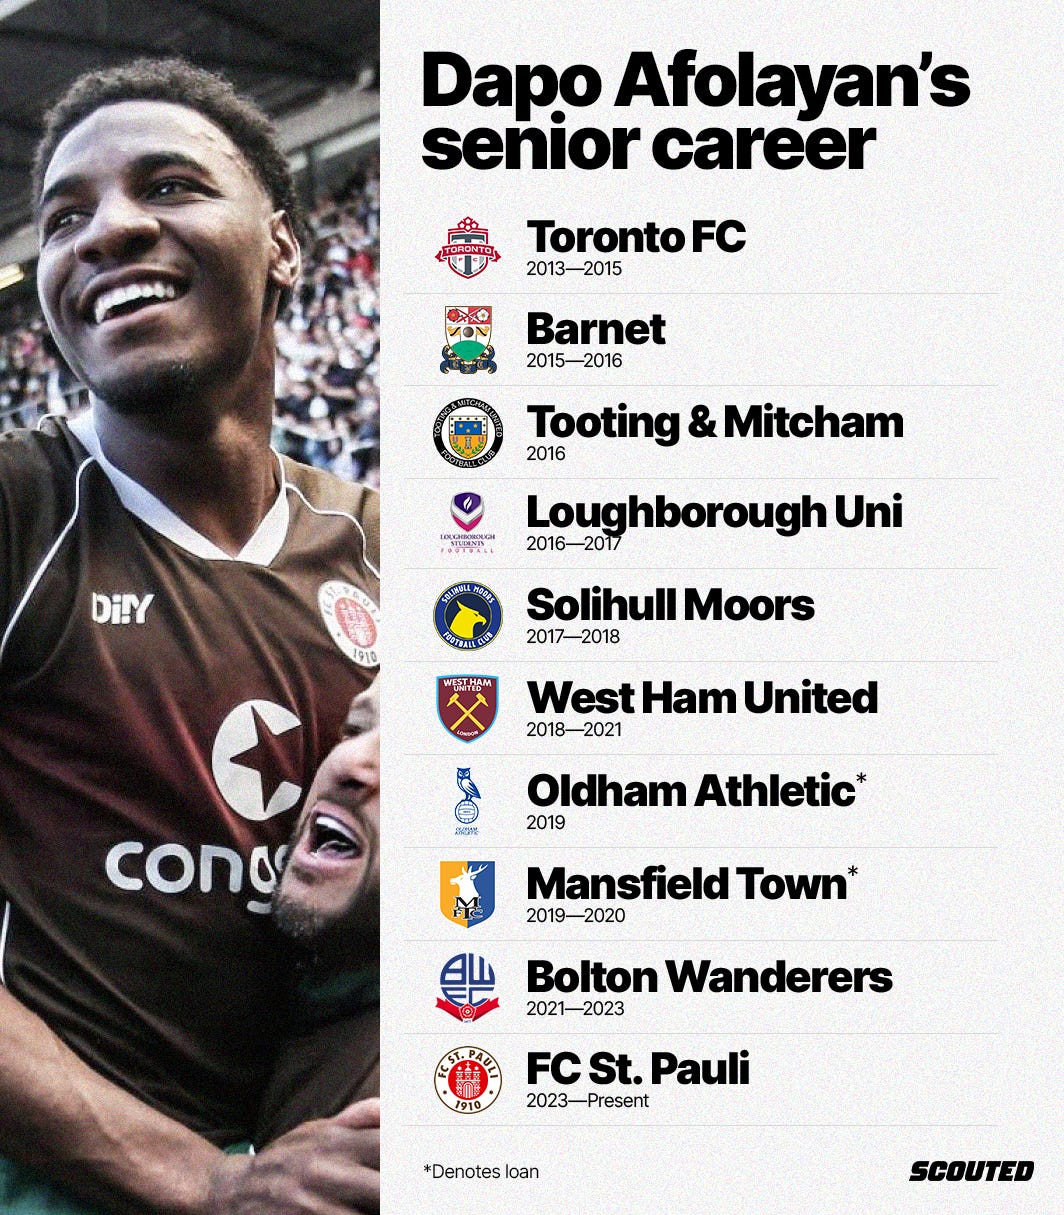 A graphic featuring the senior career to date of Dapo Afolayan. It includes the following clubs:  Toronto FC (2013-2015) Barnet (2015-2016) Tooting & Mitcham United (2016) Loughborough University (2016-2017) Solihull Moors (2017-2018) West Ham United (2018-2021) Oldham Athletic (2019) Mansfield Town (2019-2020) Bolton Wanderers (2021-2023) FC St. Pauli (2023-Present)  Each club is repesented by their club emblems. On the left-hand side is a photo of Afolayan in a brown St. Pauli shirt with a smile on his left, being lifted up by a man.  The graphic is set against an off-white background with a black 'SCOUTED' logo in the bottom-right corner.